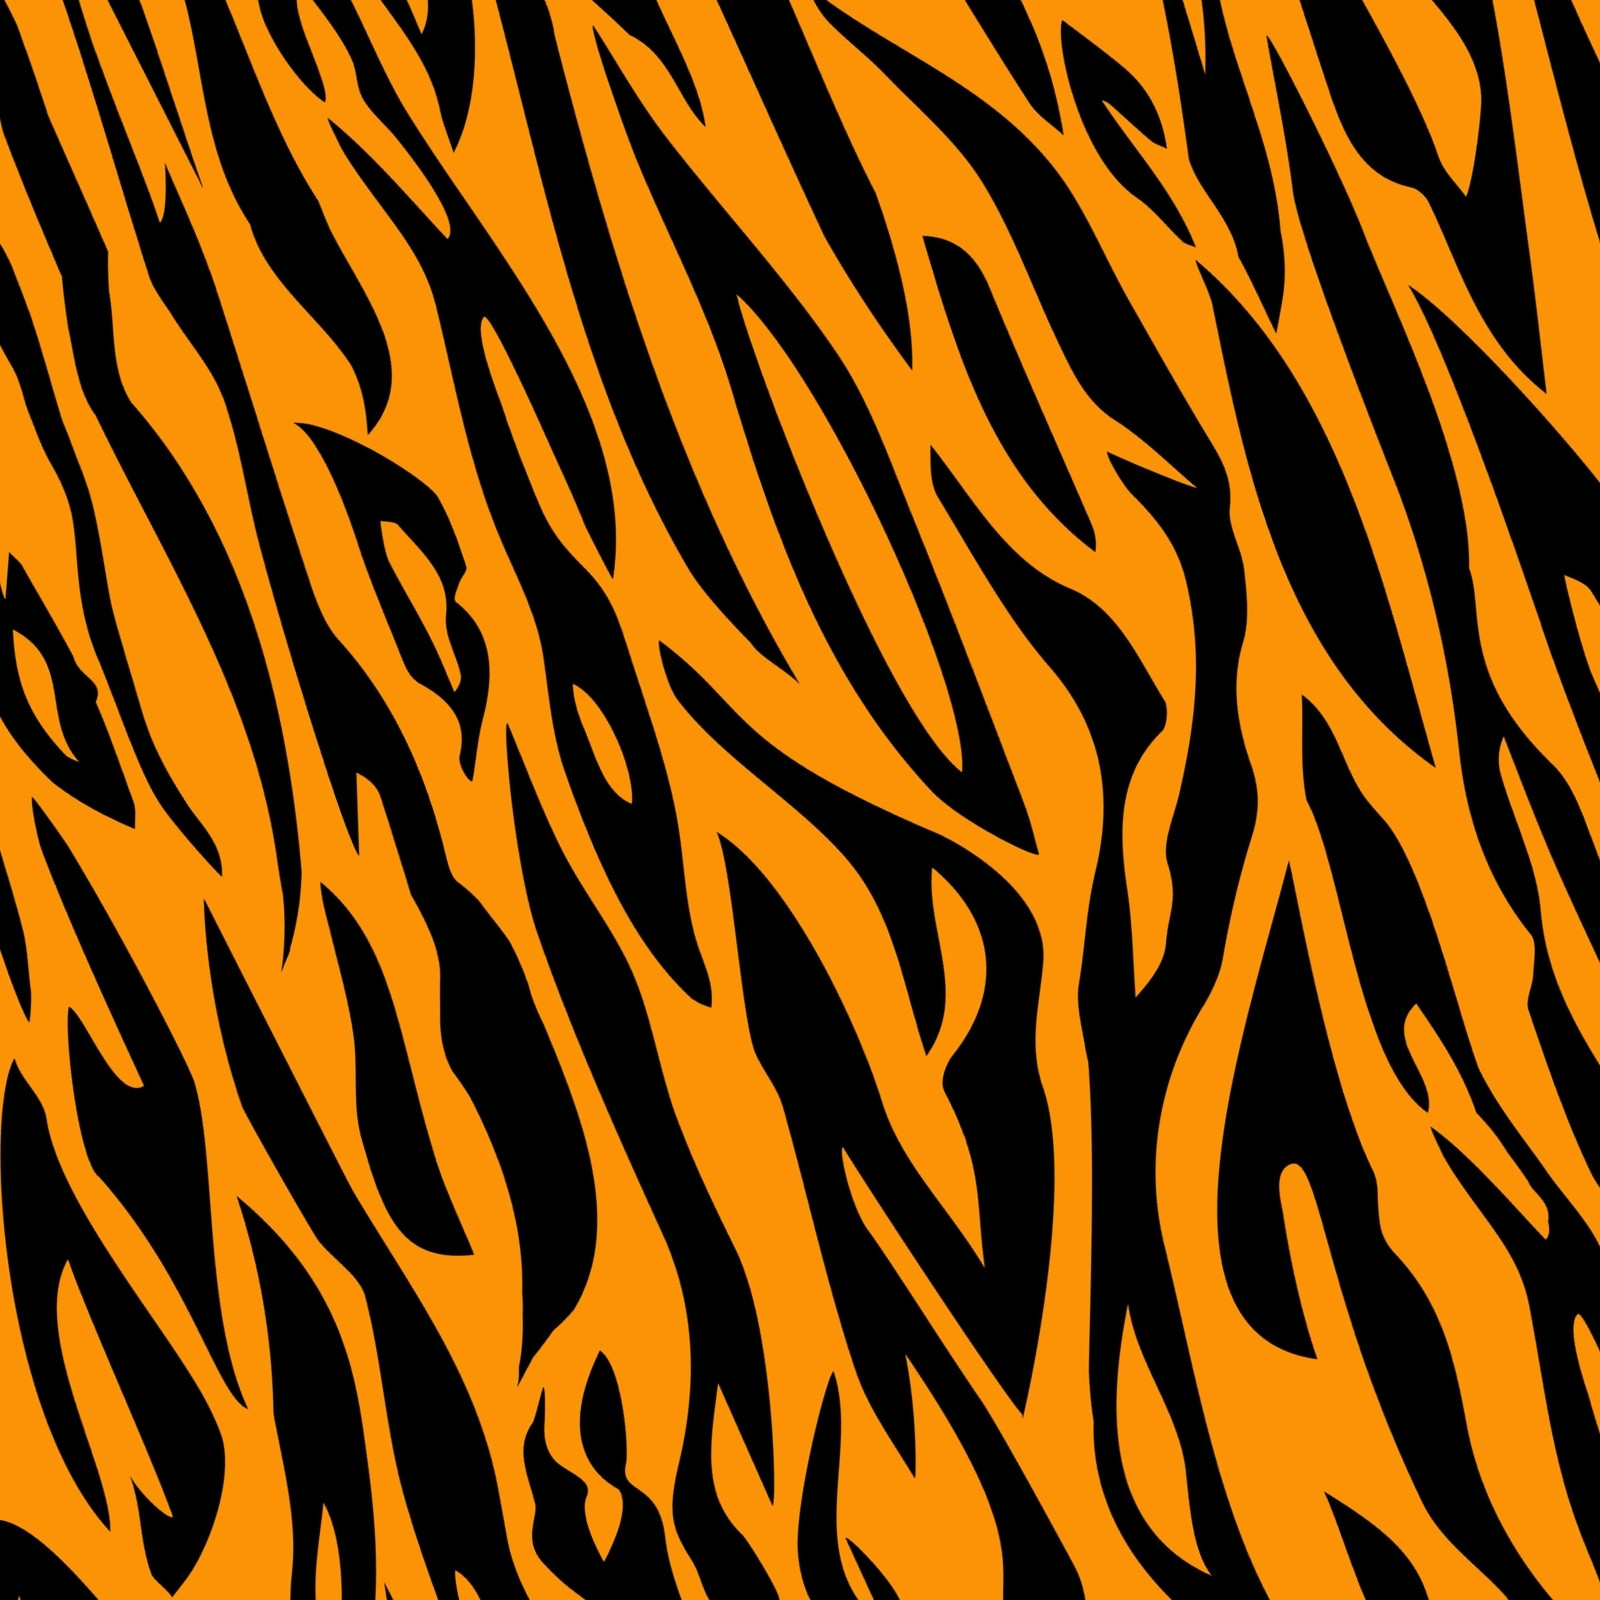 Free and customizable tiger templates